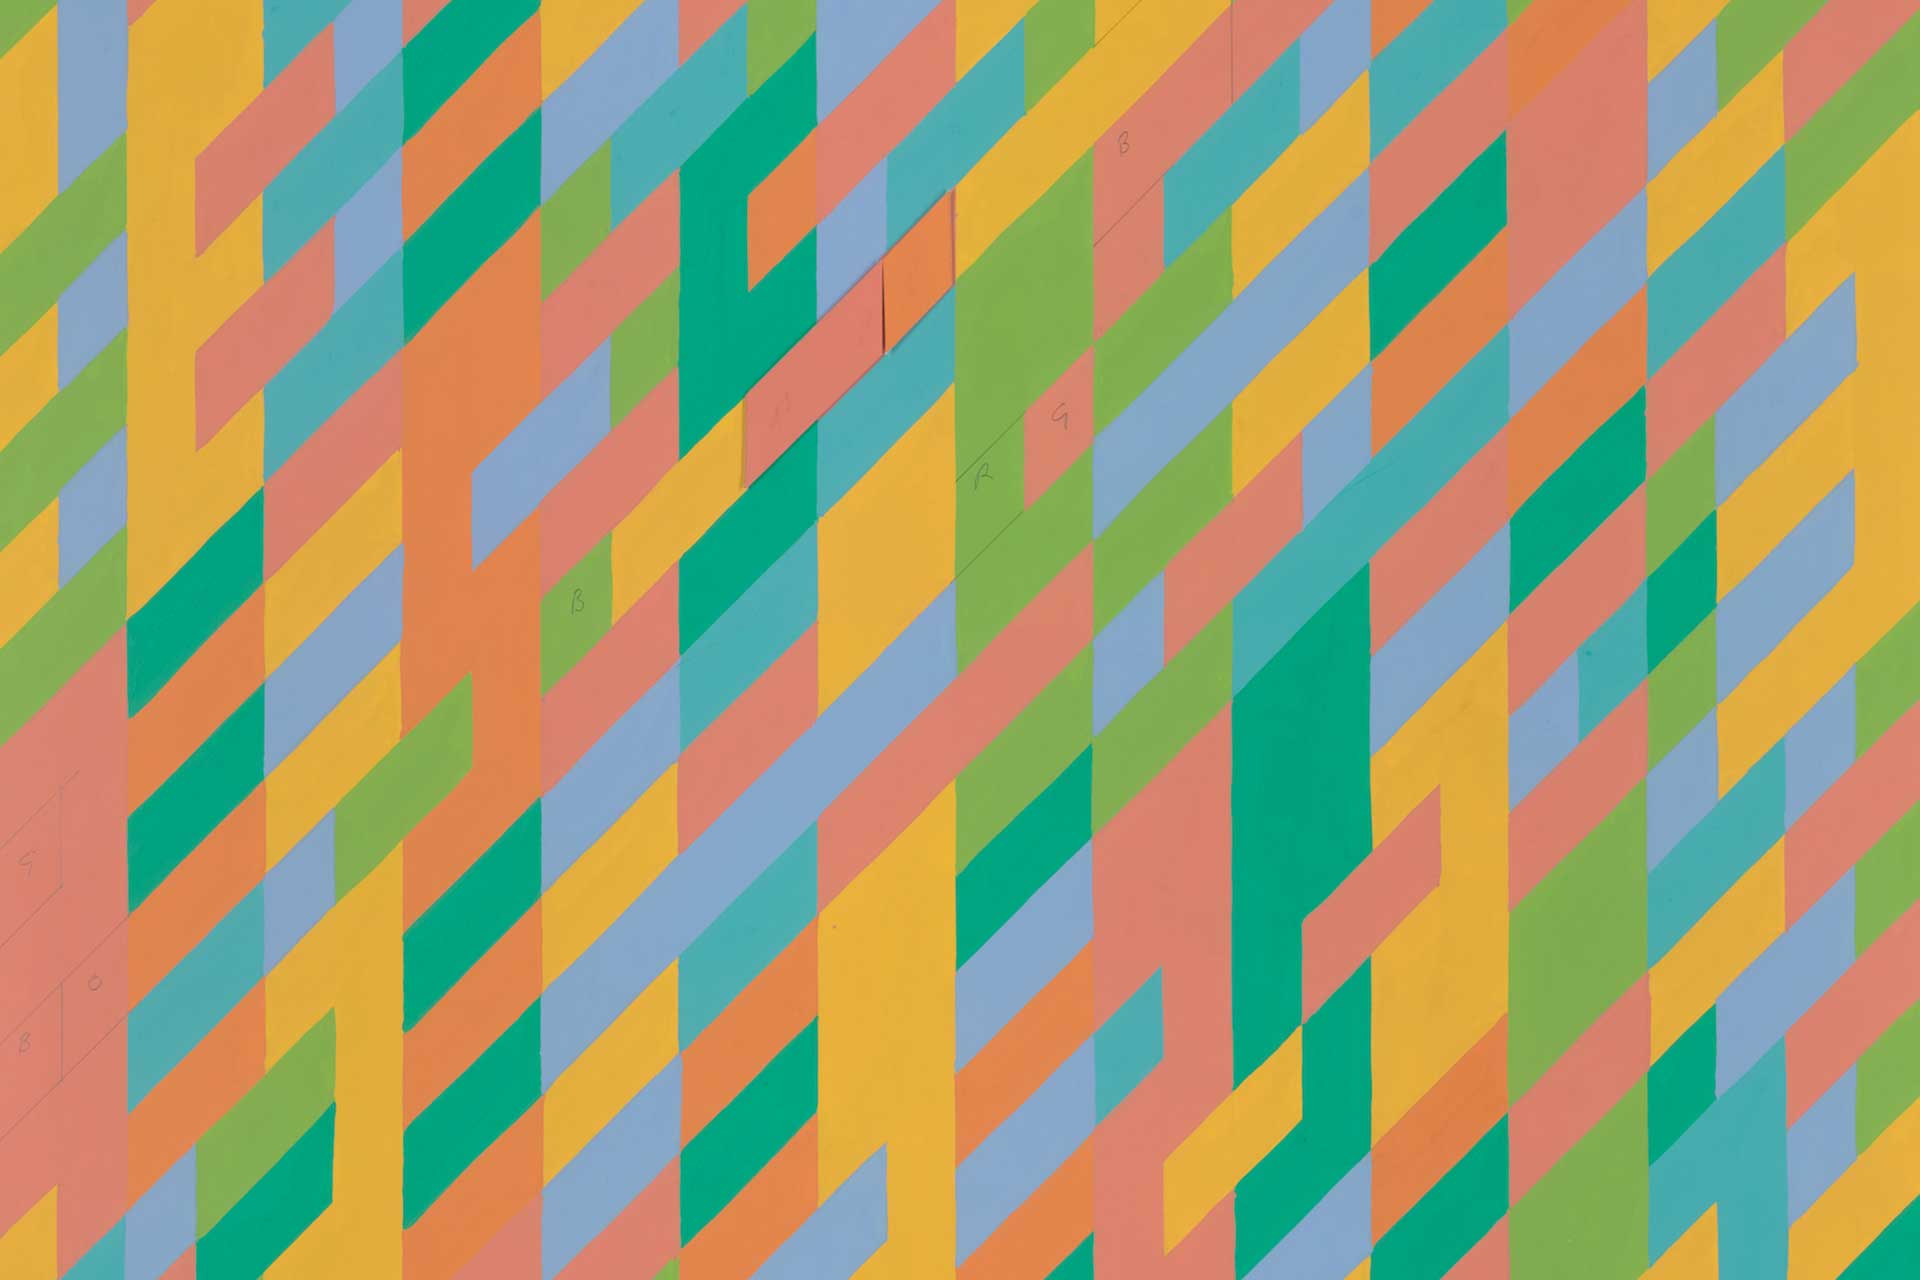 Bridget Riley Working Drawings, an exploration of the artist's work